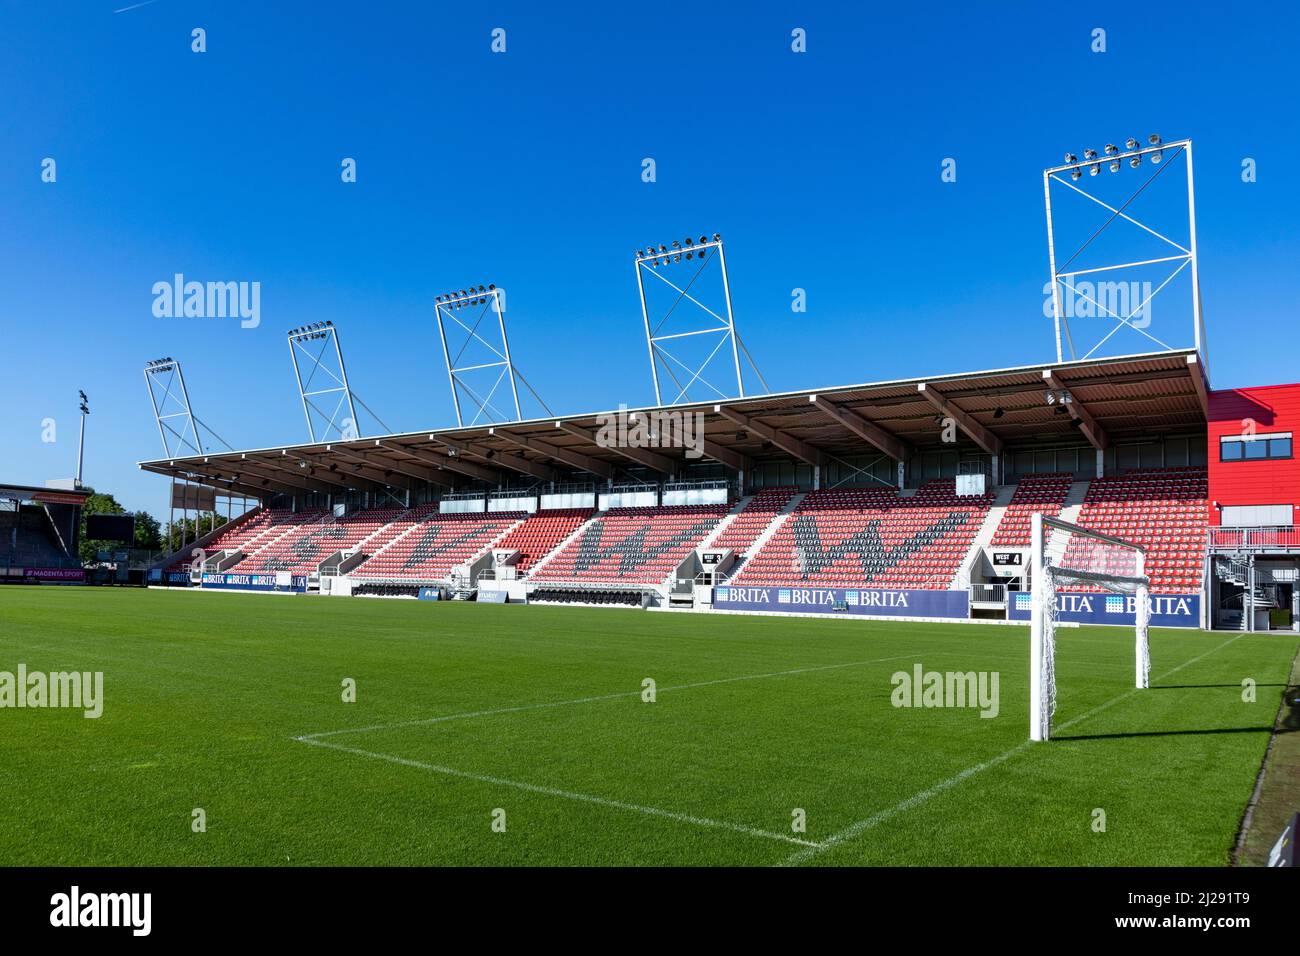 Wiesbaden, Germany - September 3, 2021: The Brita arena is the home statium for the soccer team SV Wehen Wiesbaden,playing in the professional league Stock Photo